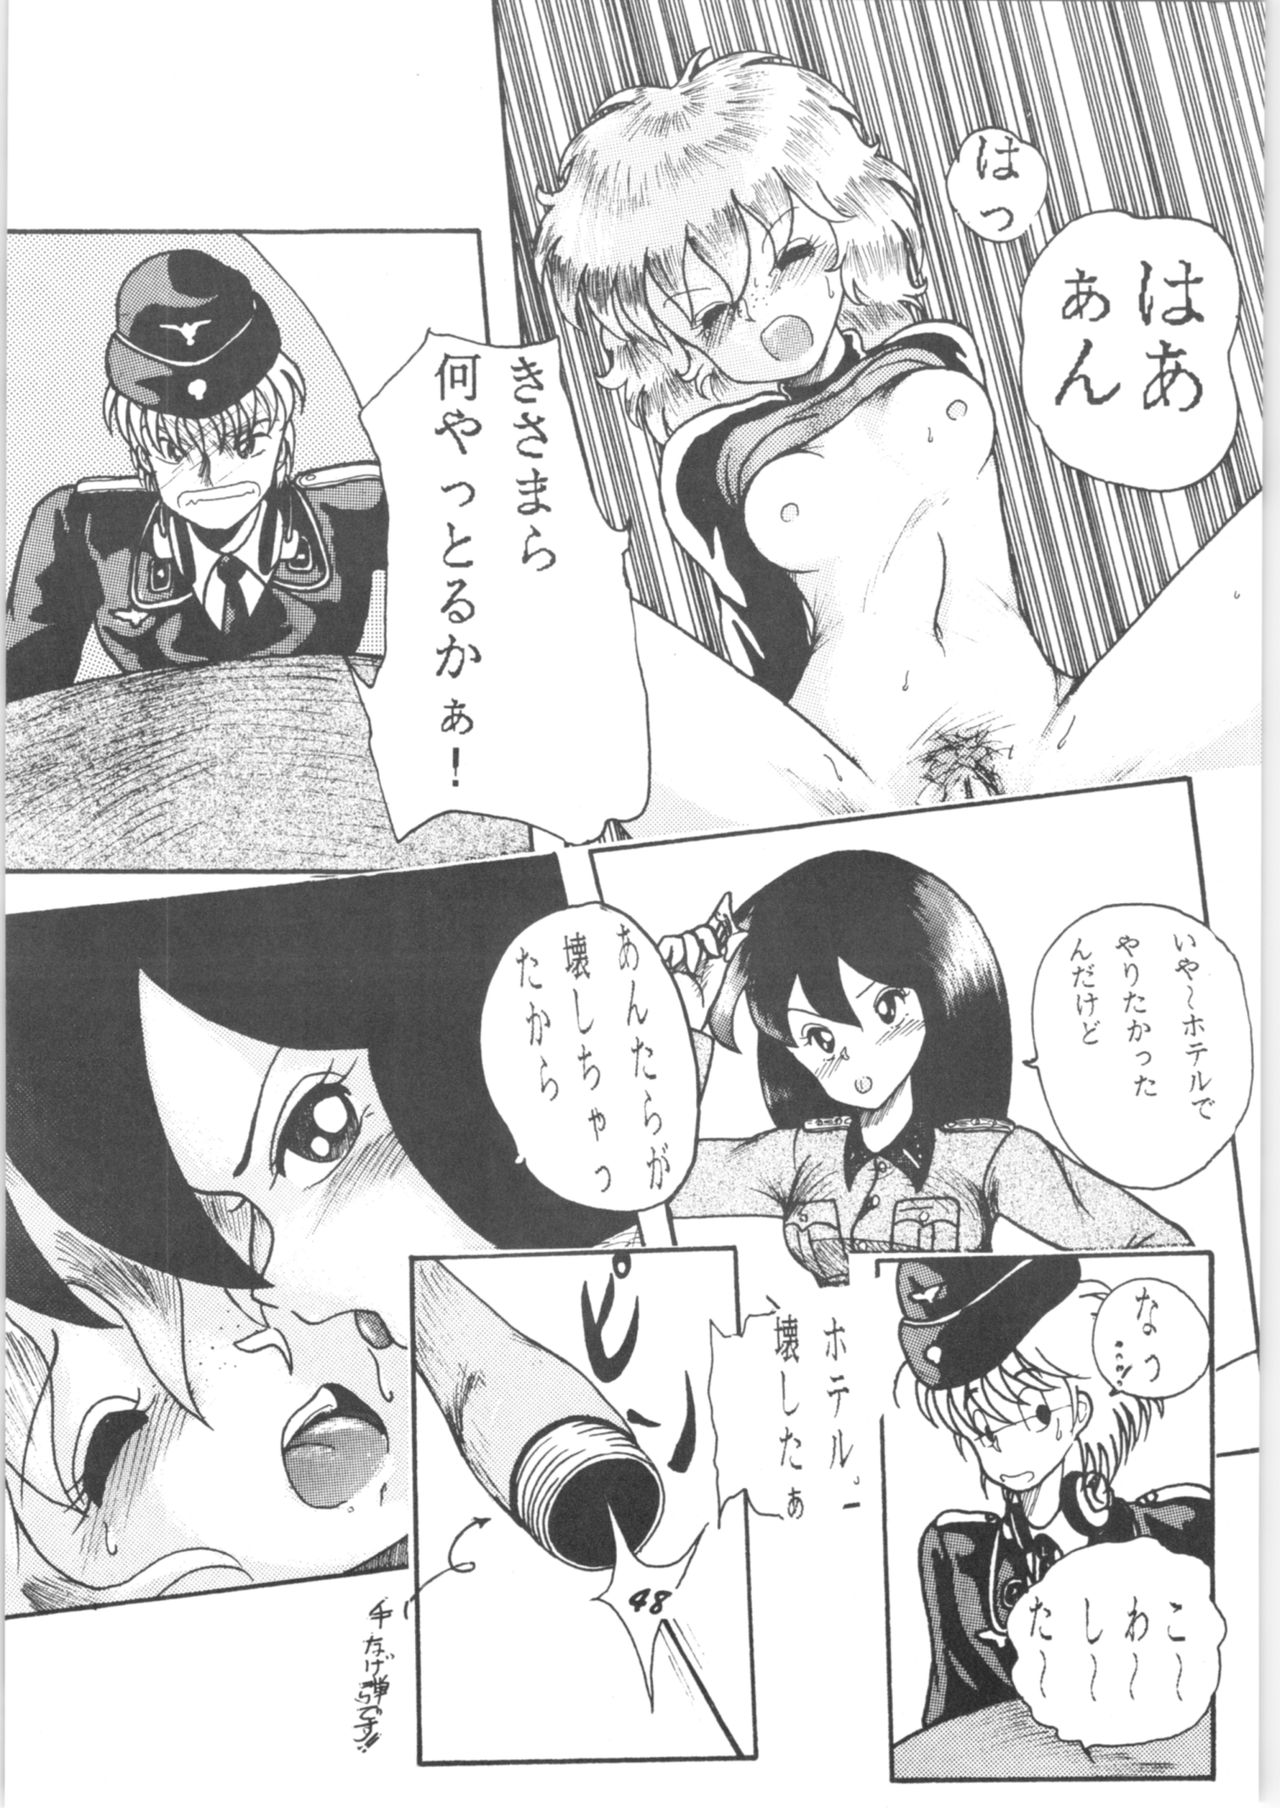 (C36) [Signal Group (Various)] Sieg Heil (Various) page 47 full